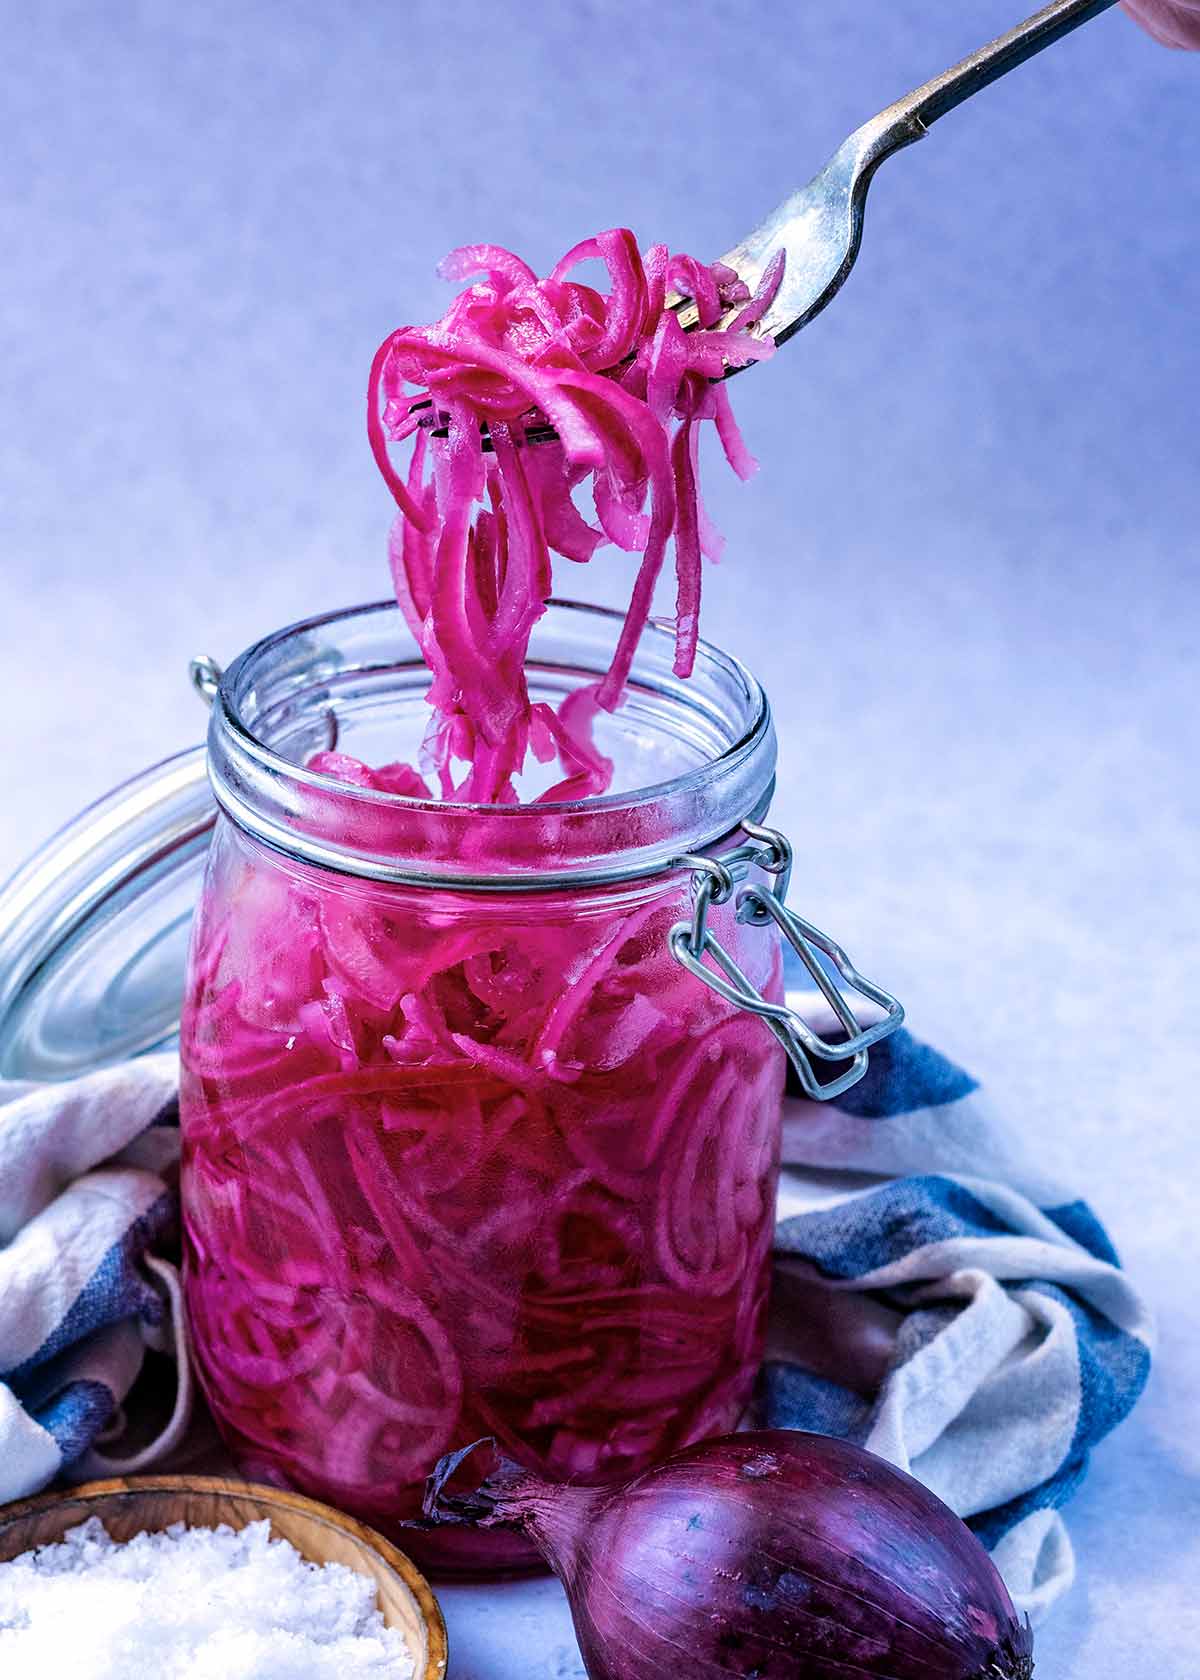 A fork lifting some slices of red onion out of a glass jar.